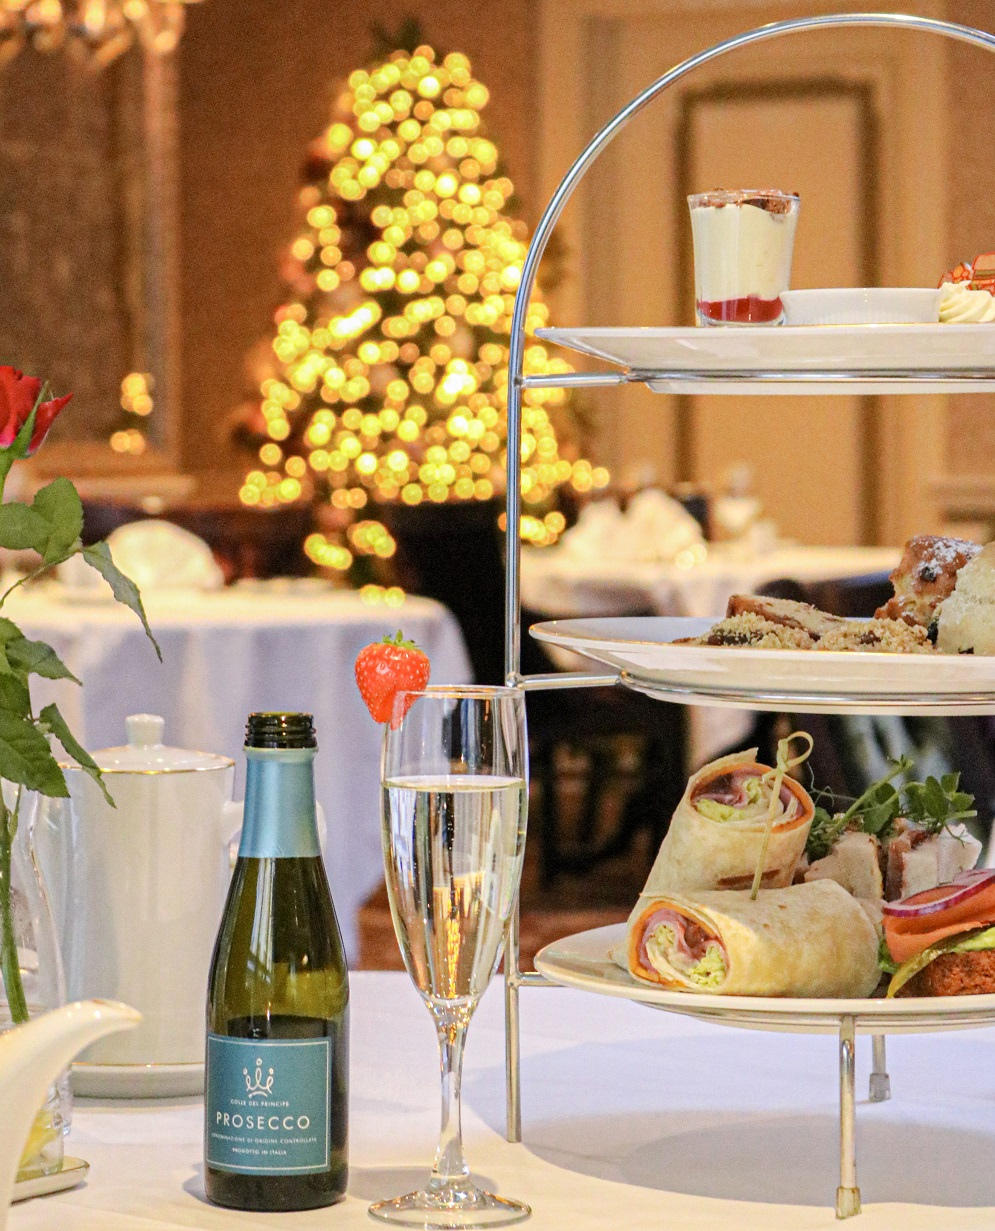 Prosecco at Festive Afternoon Tea